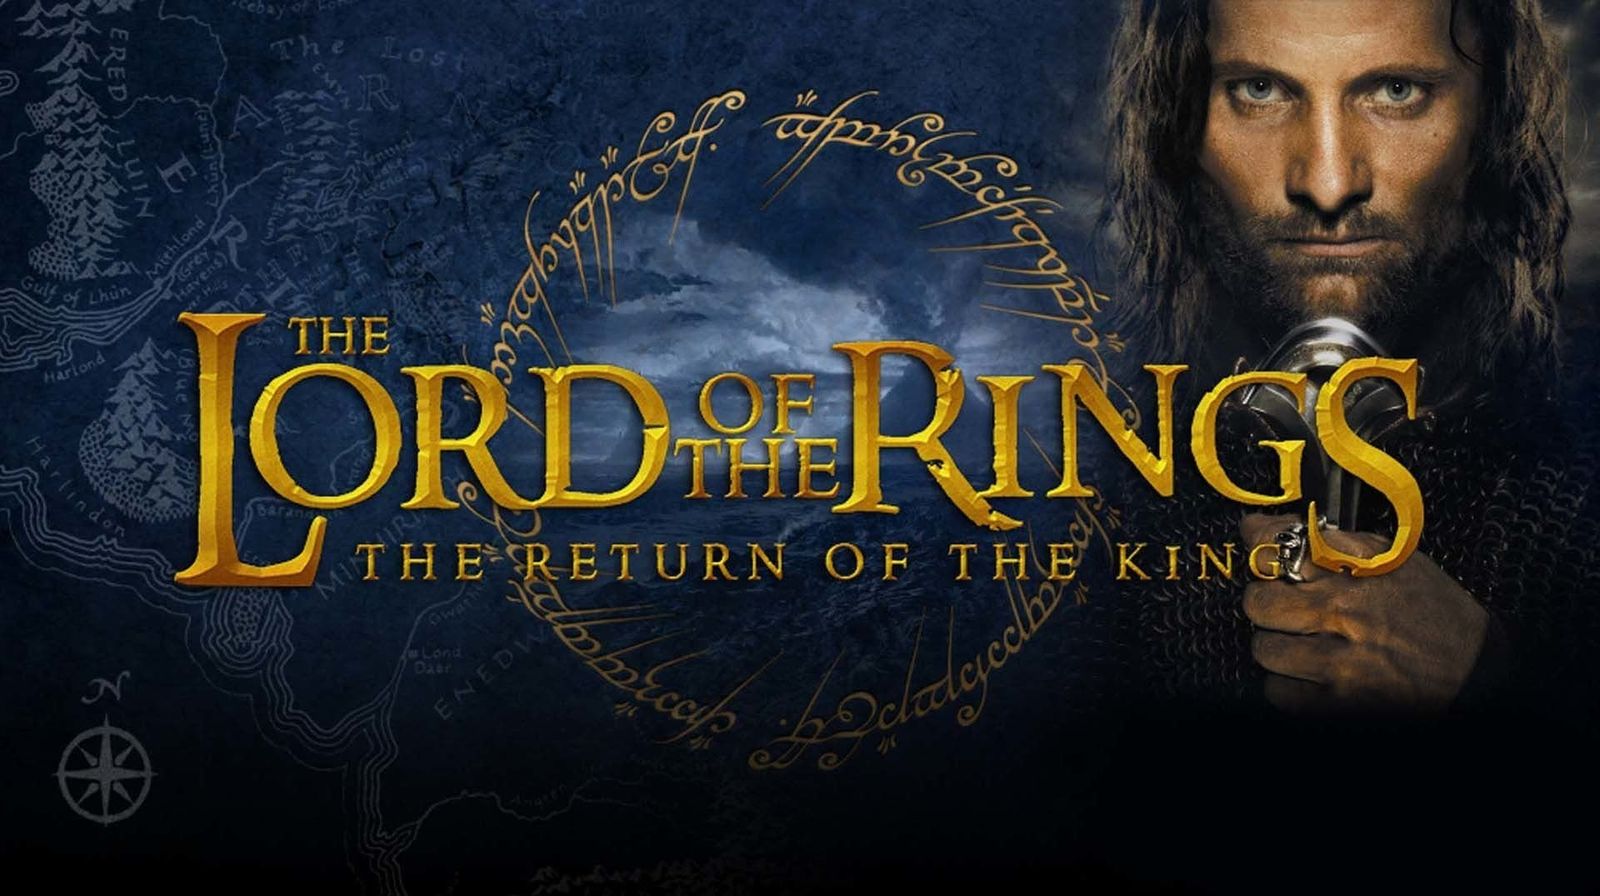 33300 41112 31796 The Return of the King: Lord of the Rings Trilogy Returning to Theaters in June